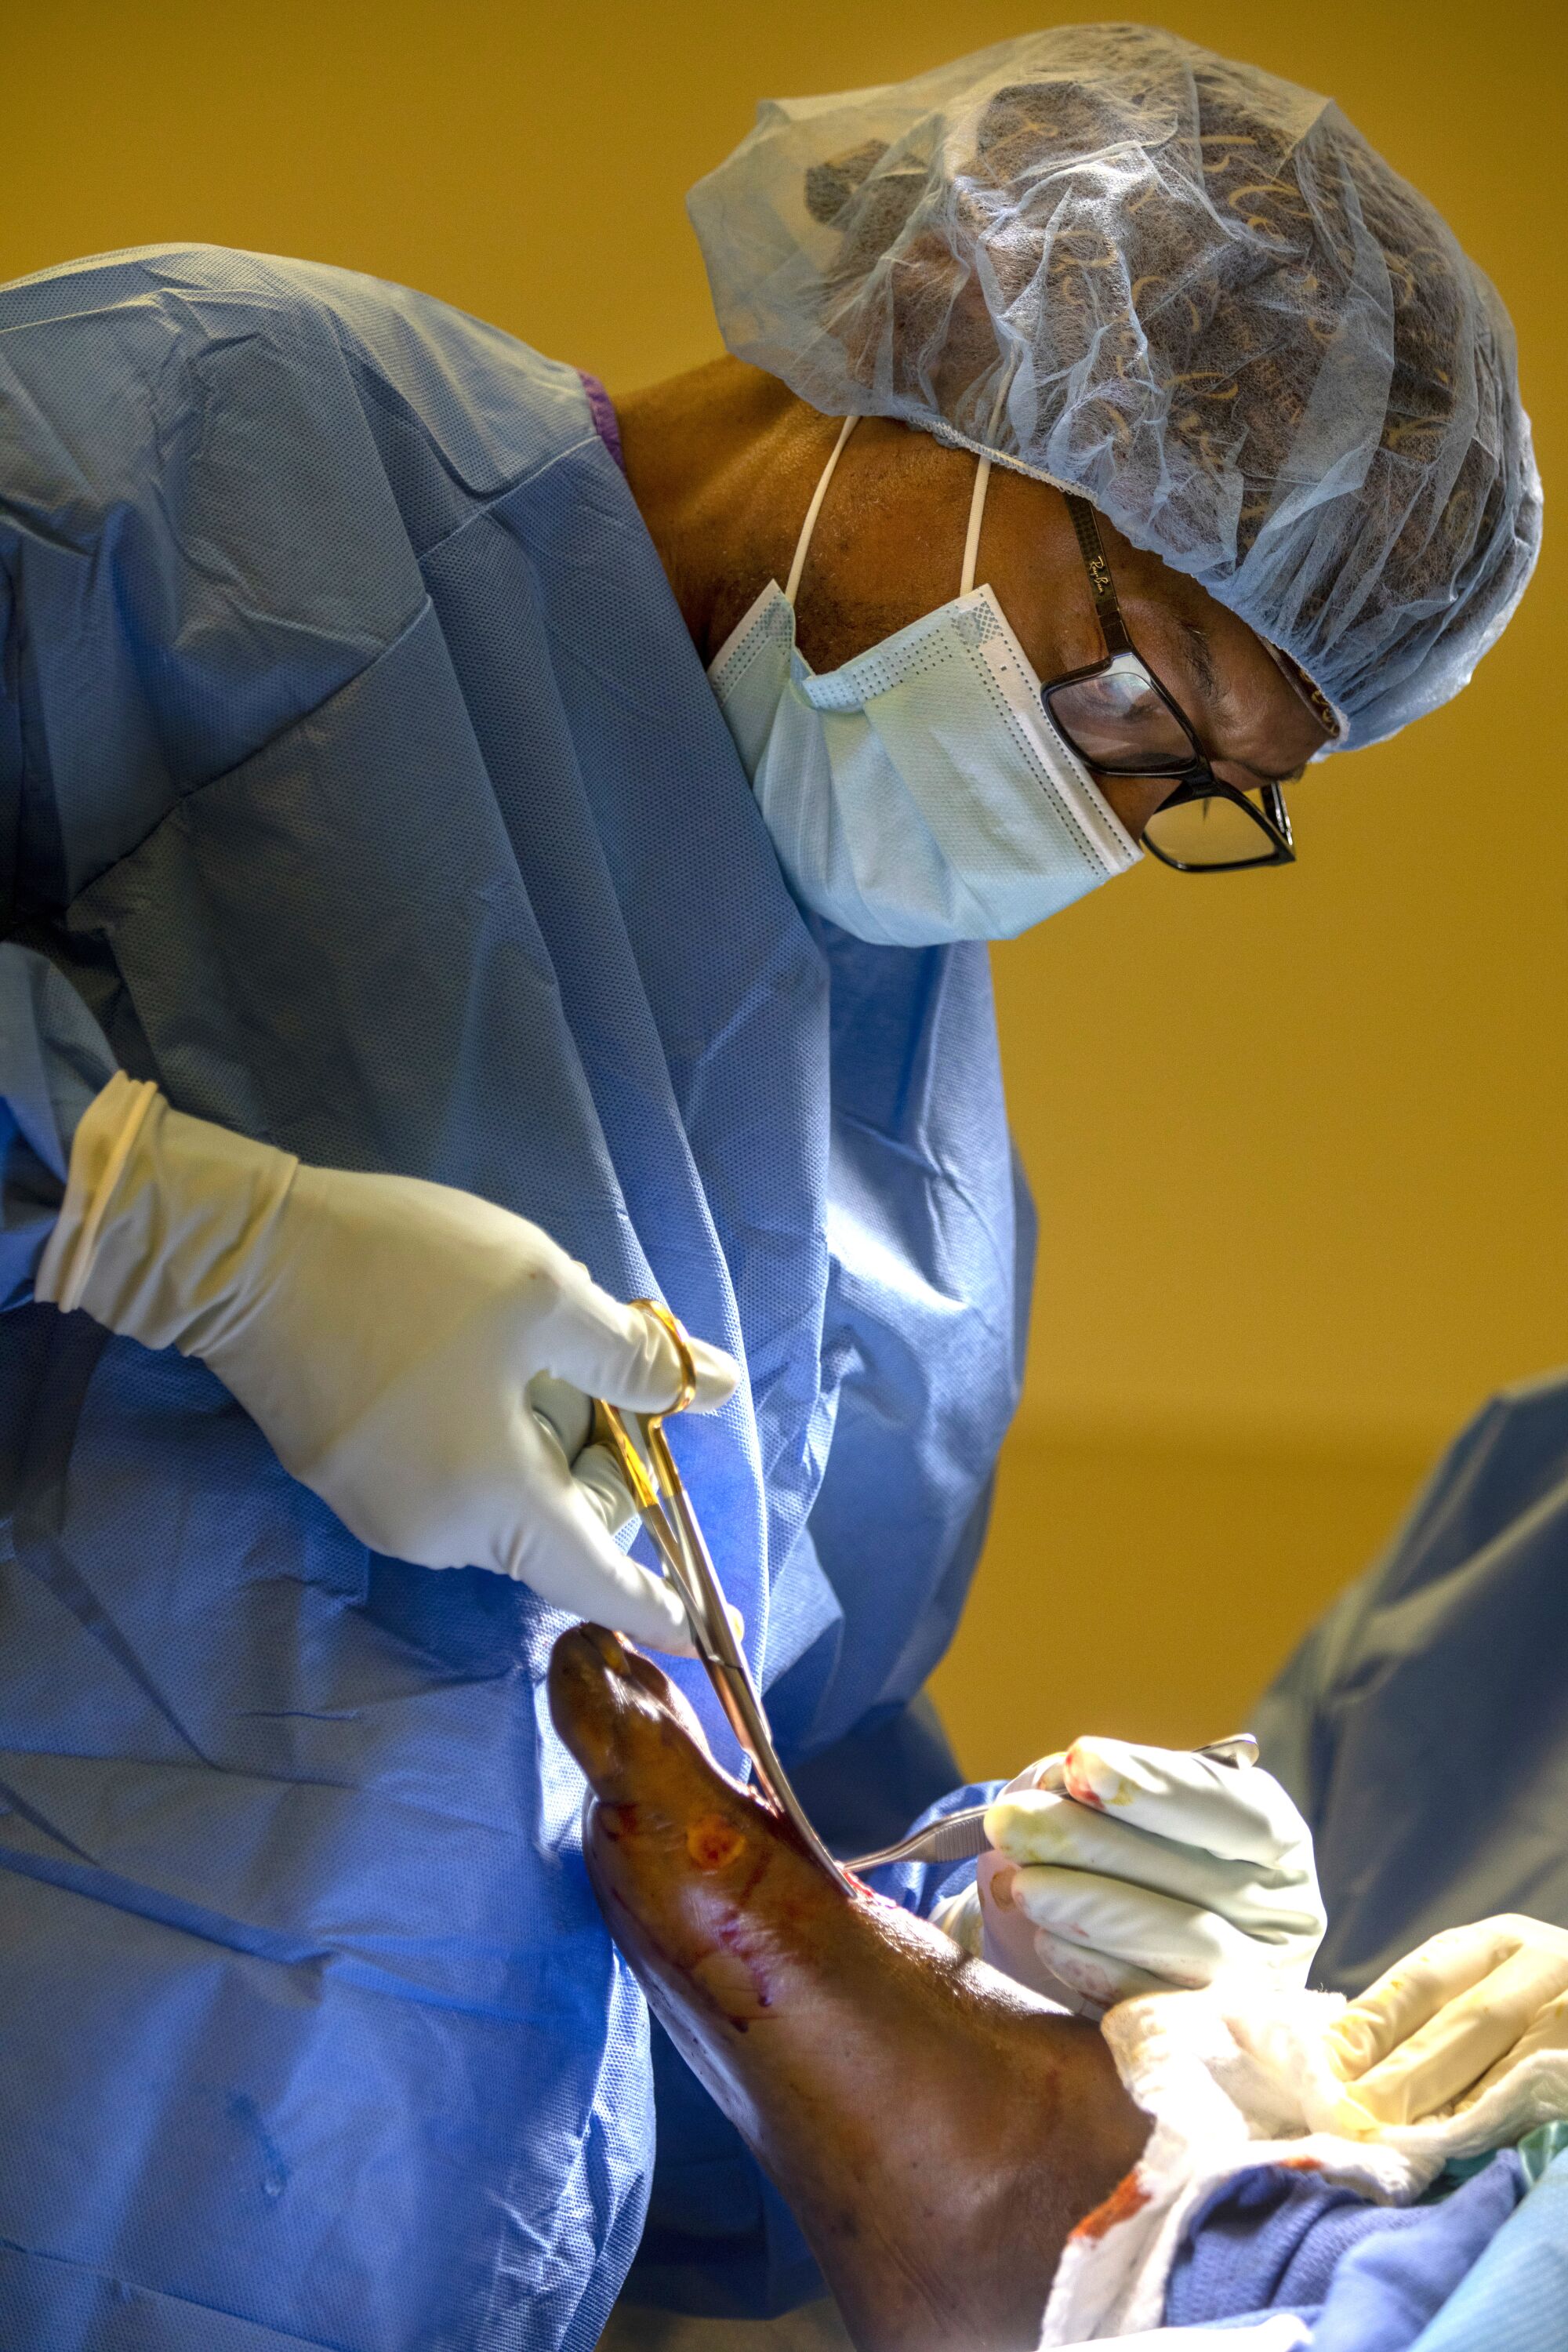  A surgeon uses instruments to work on a patient's bare foot.